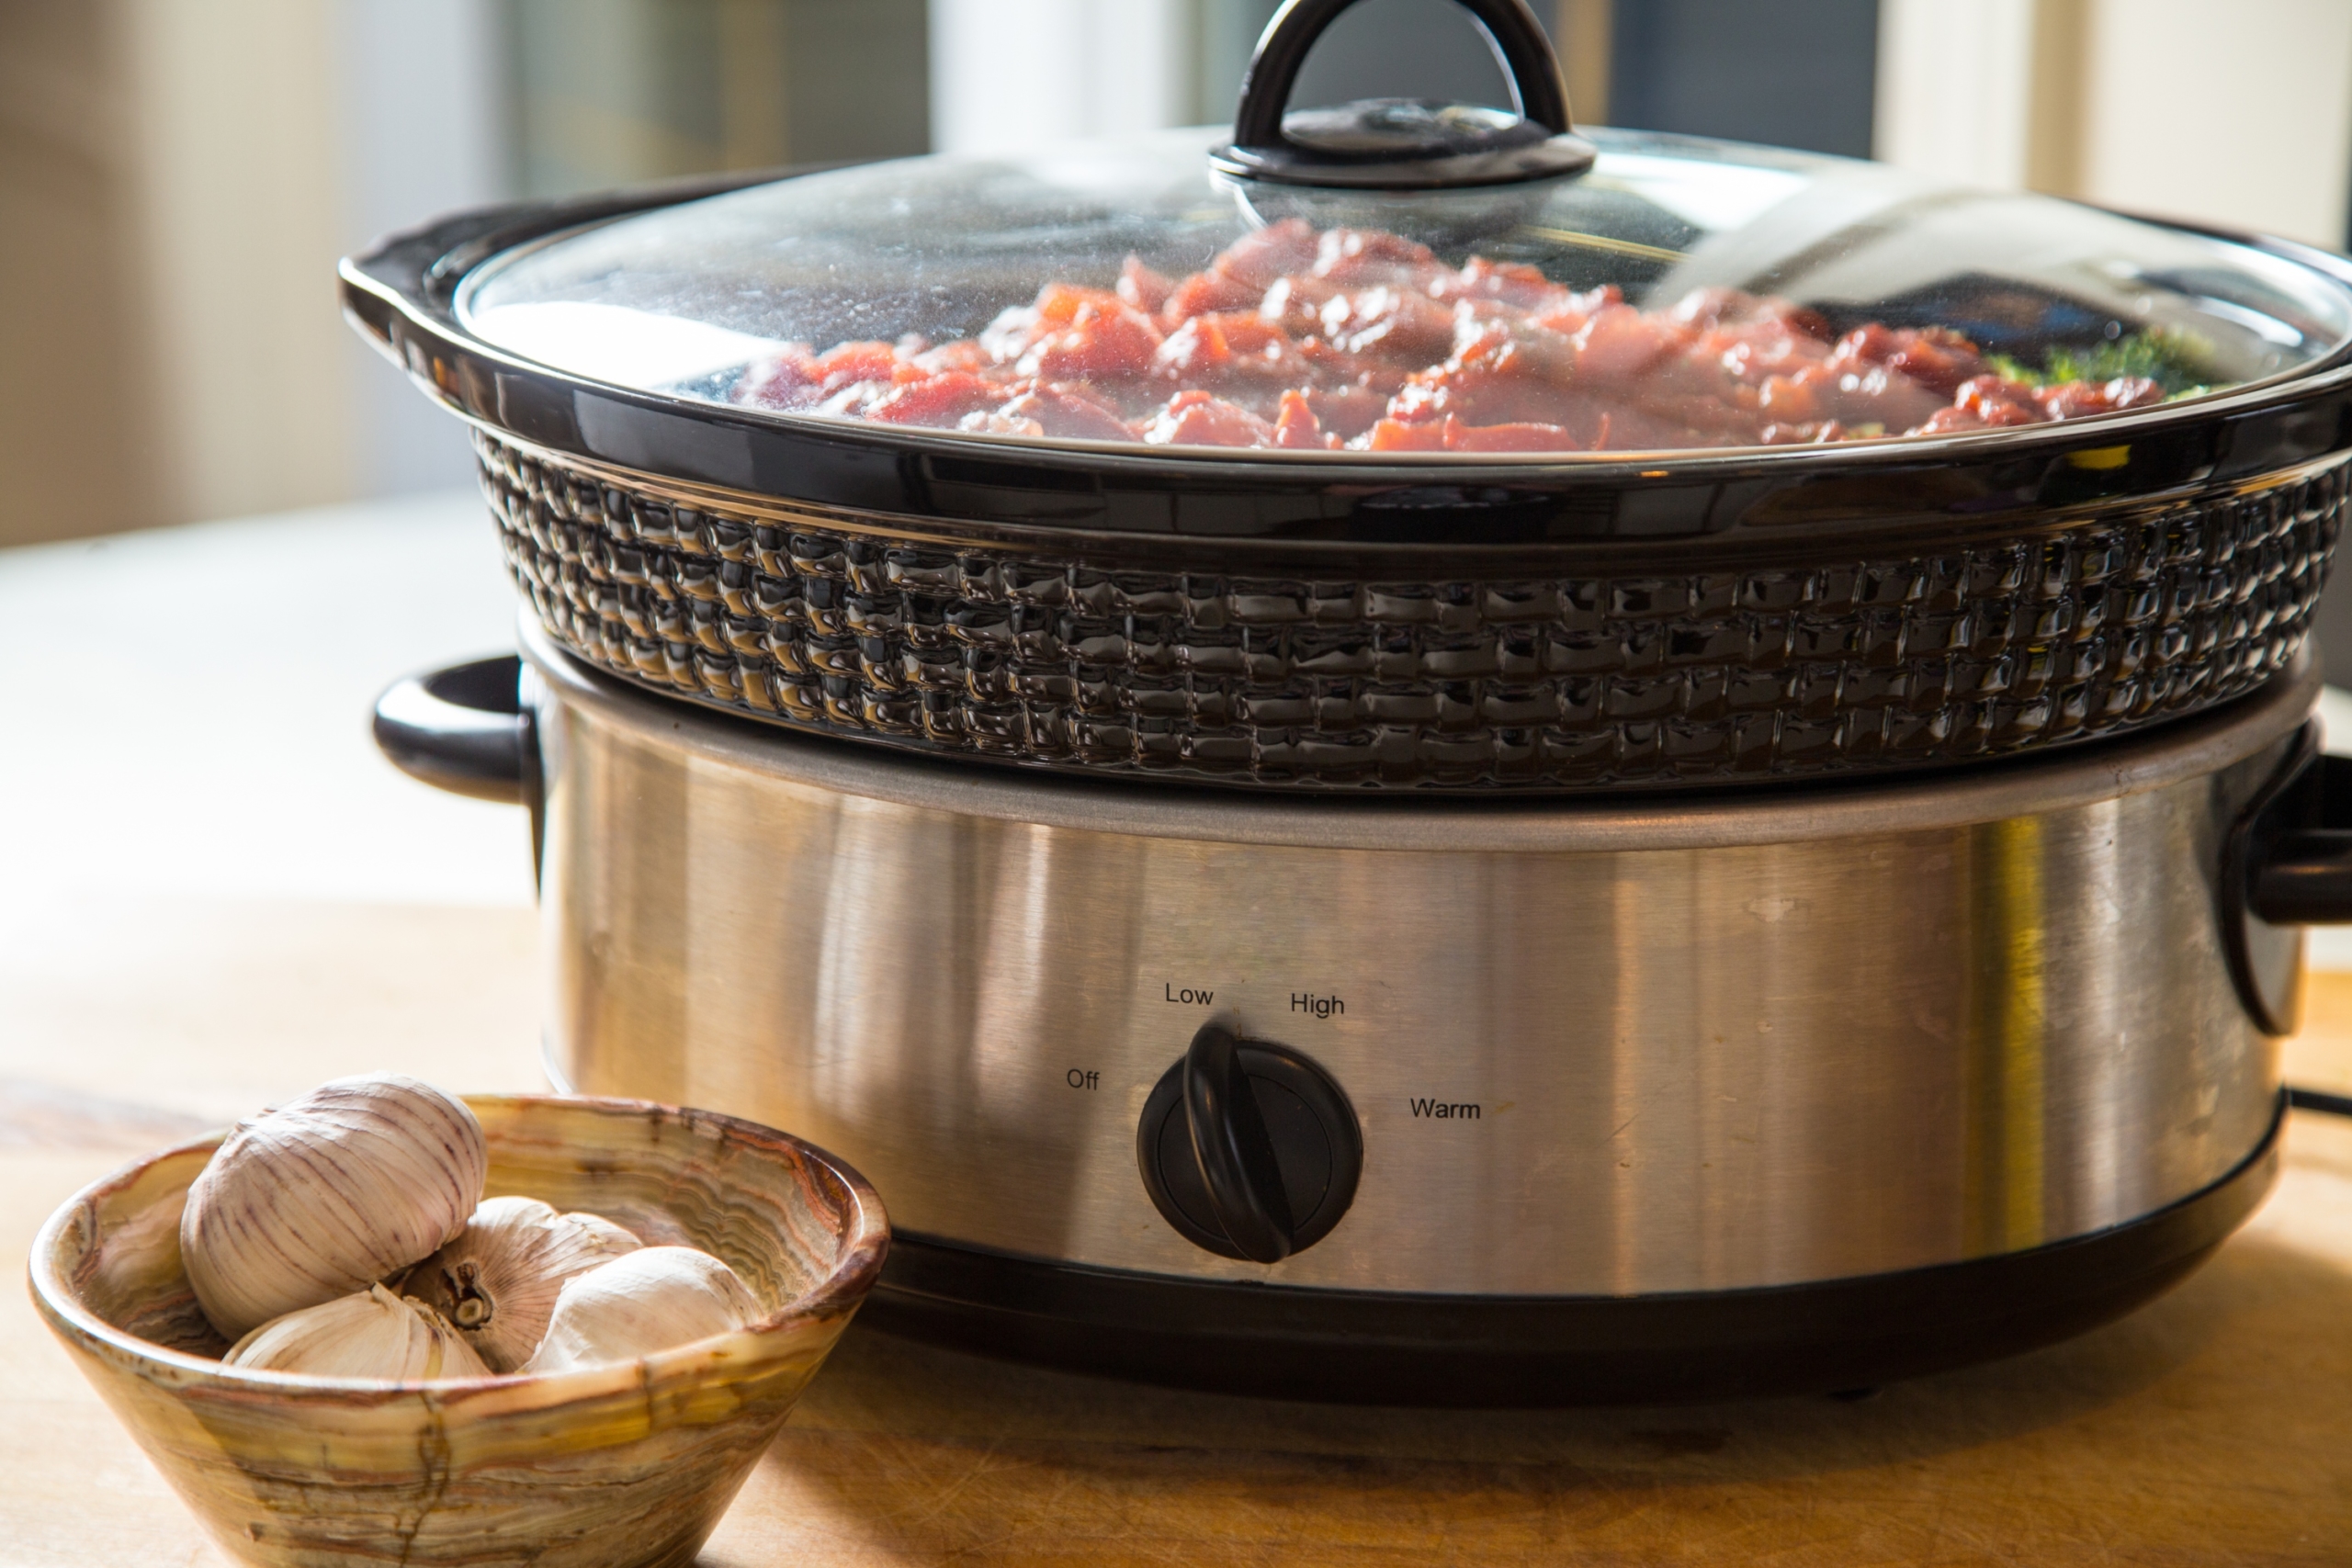 Slow cooker on a table with food